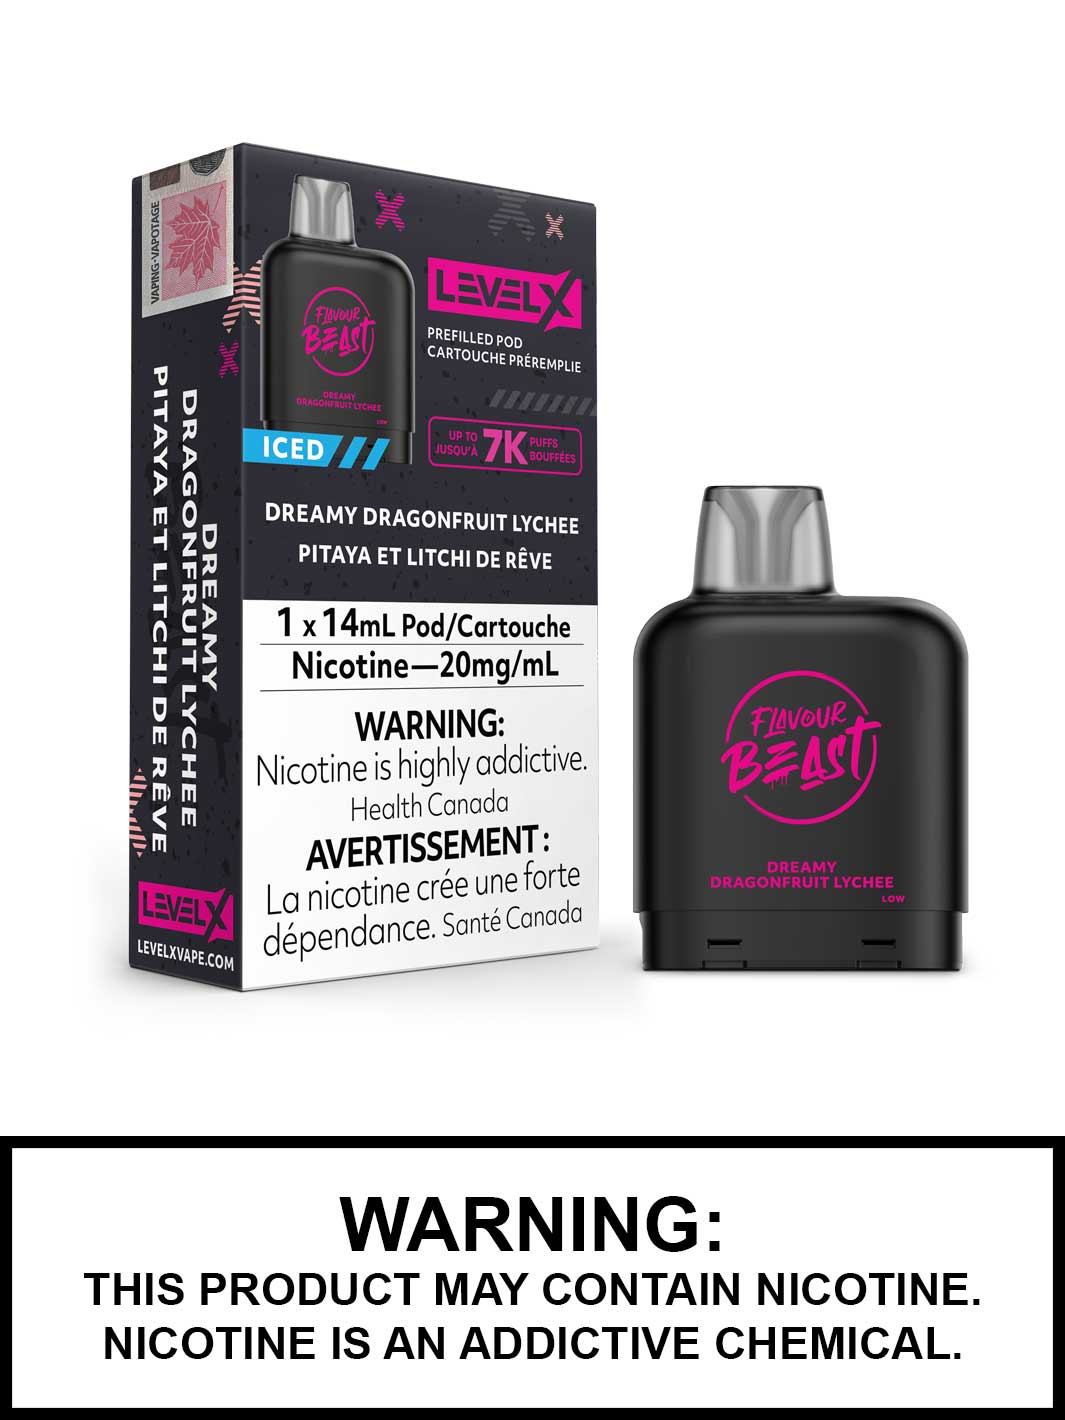 Dreamy Dragonfruit Lychee Iced Level X Flavour Beast Pods, Vape360 Canada